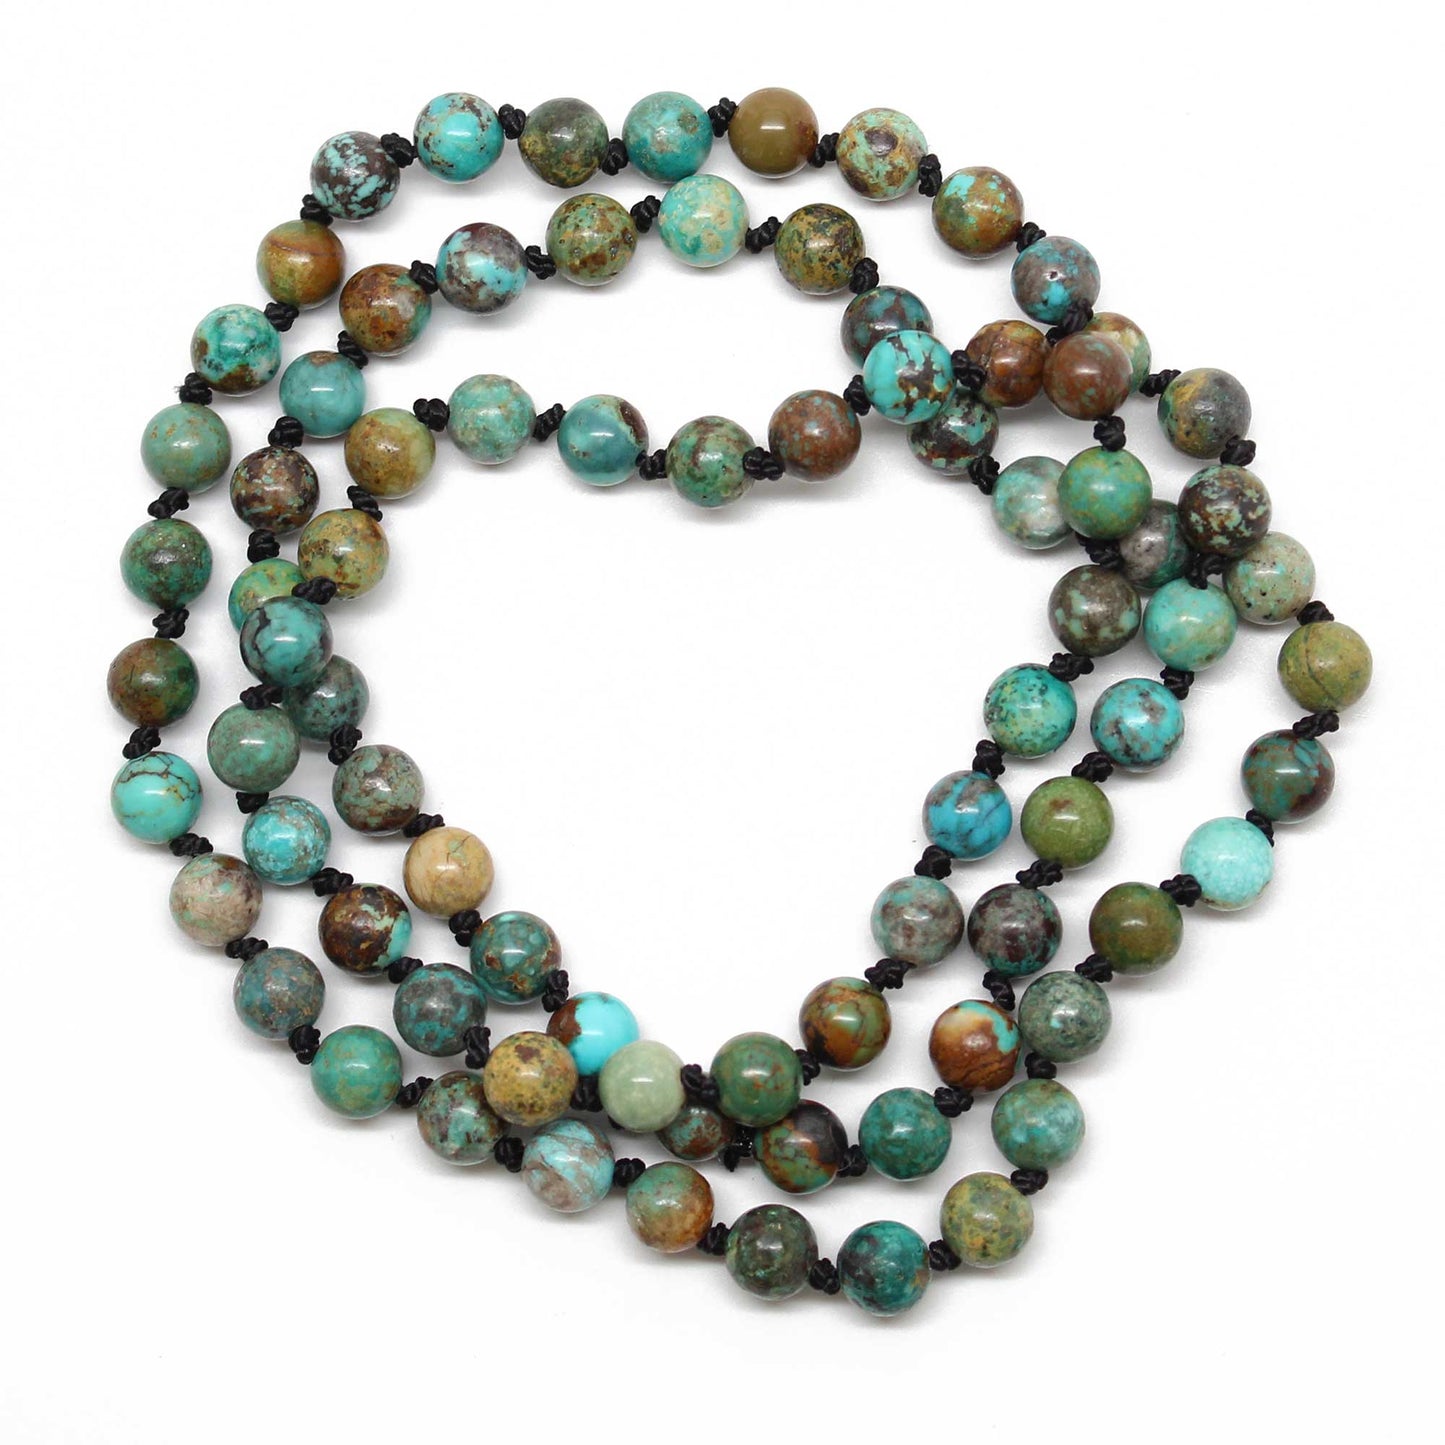 Hand Knotted Hubei Turquoise Bead Necklace, 26 Inch Endless Strand